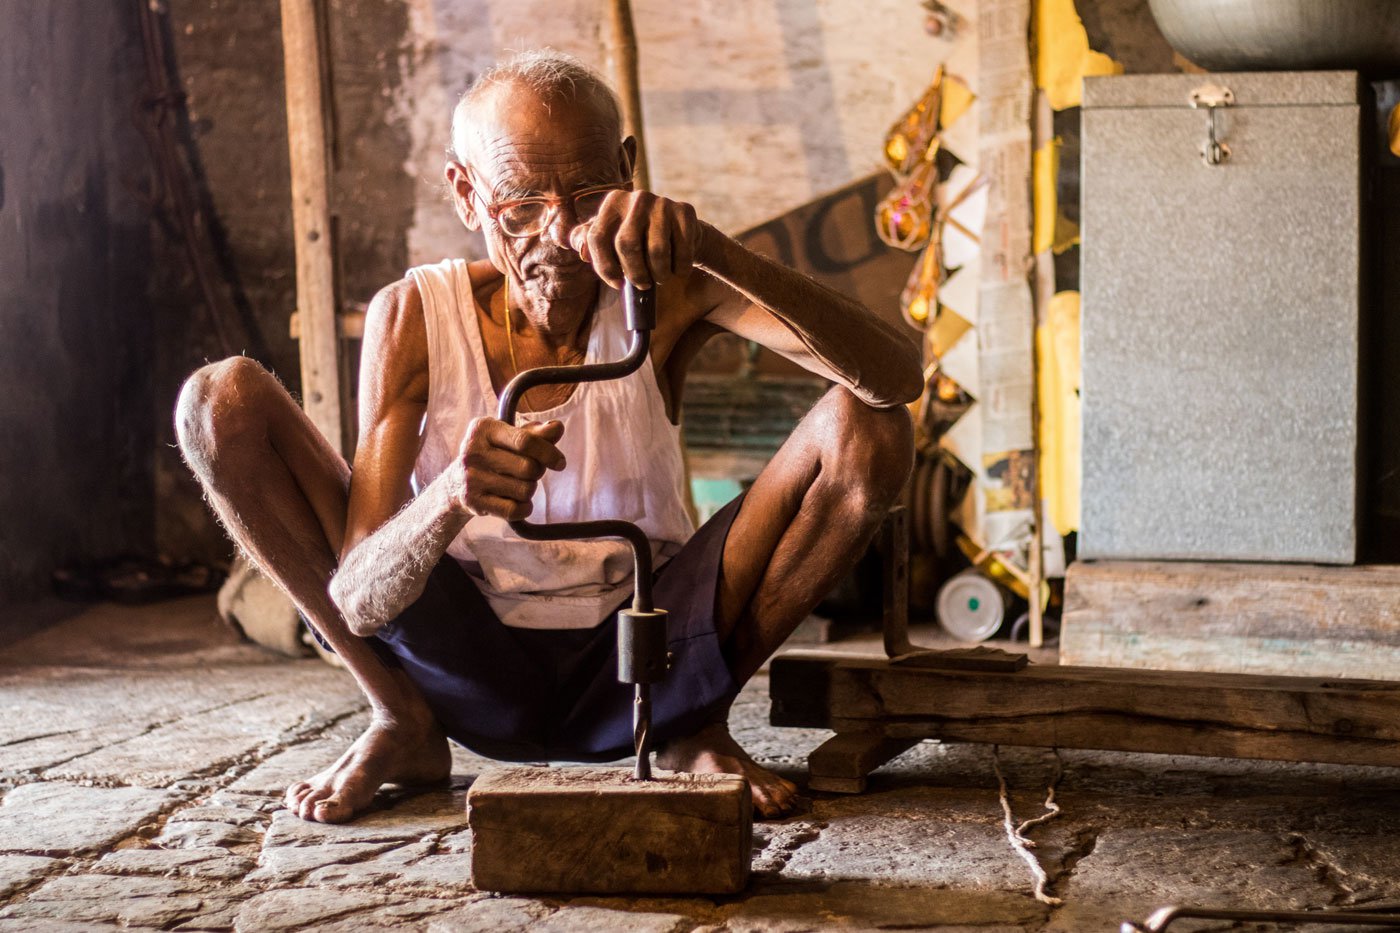 Bapu demonstrates how a manual hand drill was used; making wooden treadle handlooms by hand was an intense, laborious process